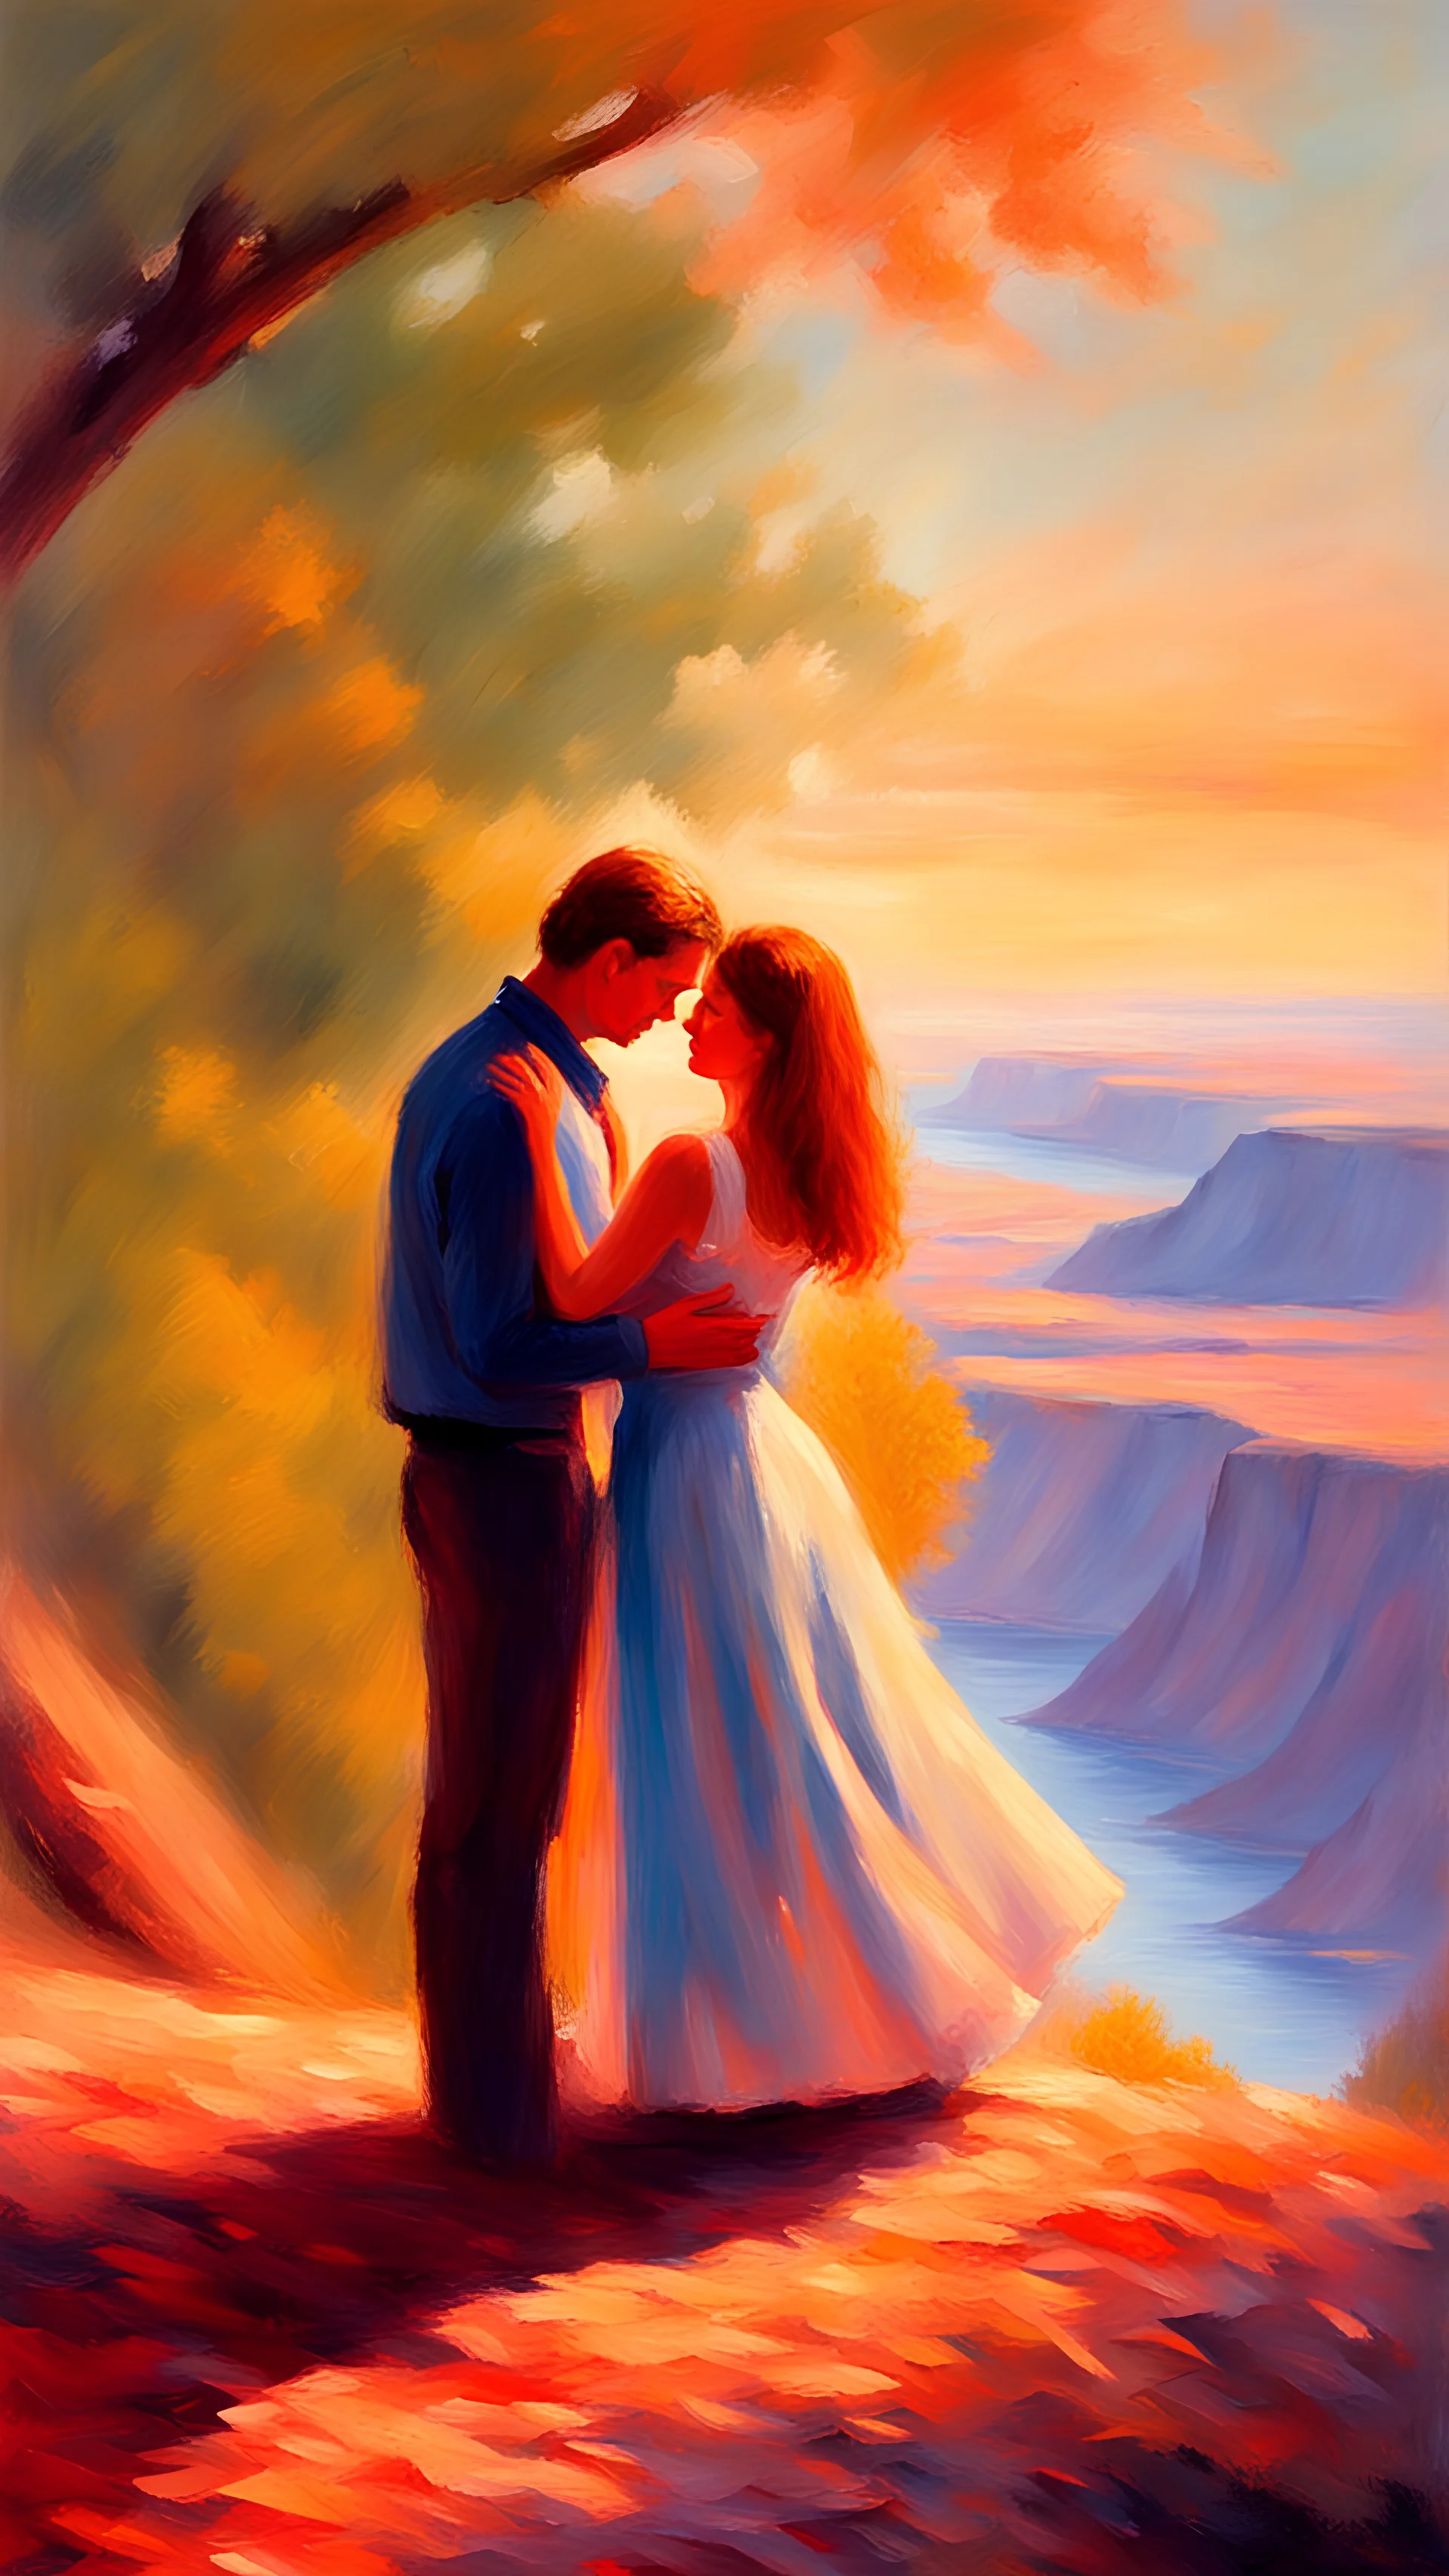 impressionism-style oil painting of a man holding his lover and looking in her eyes with a beautiful view in the background